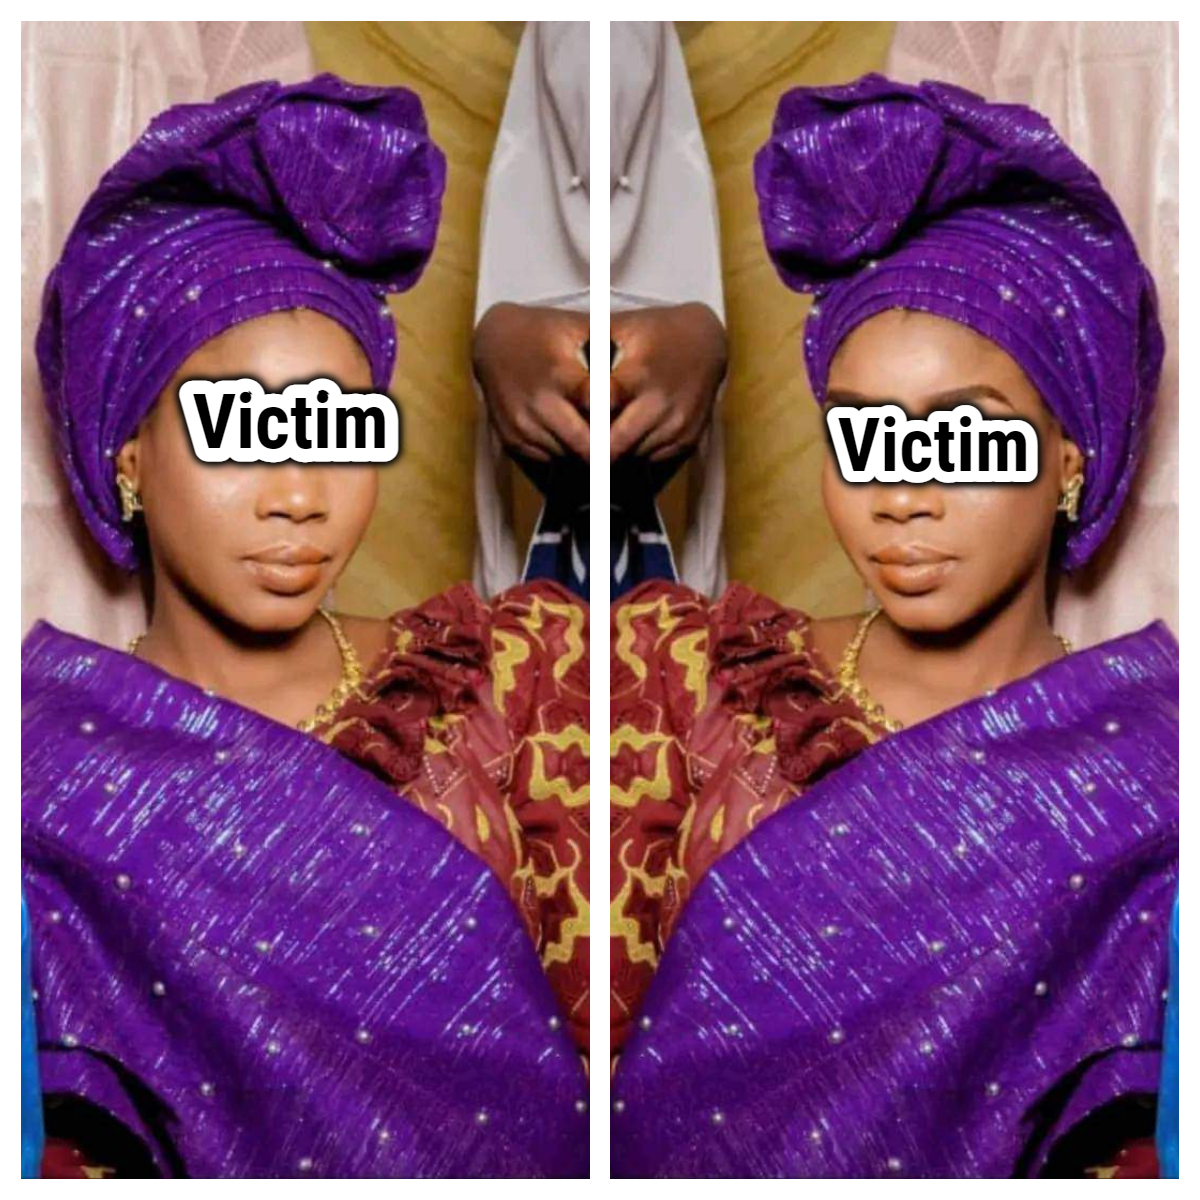 Housewife Gang-raped, Killed By Unknown Men In Jigawa